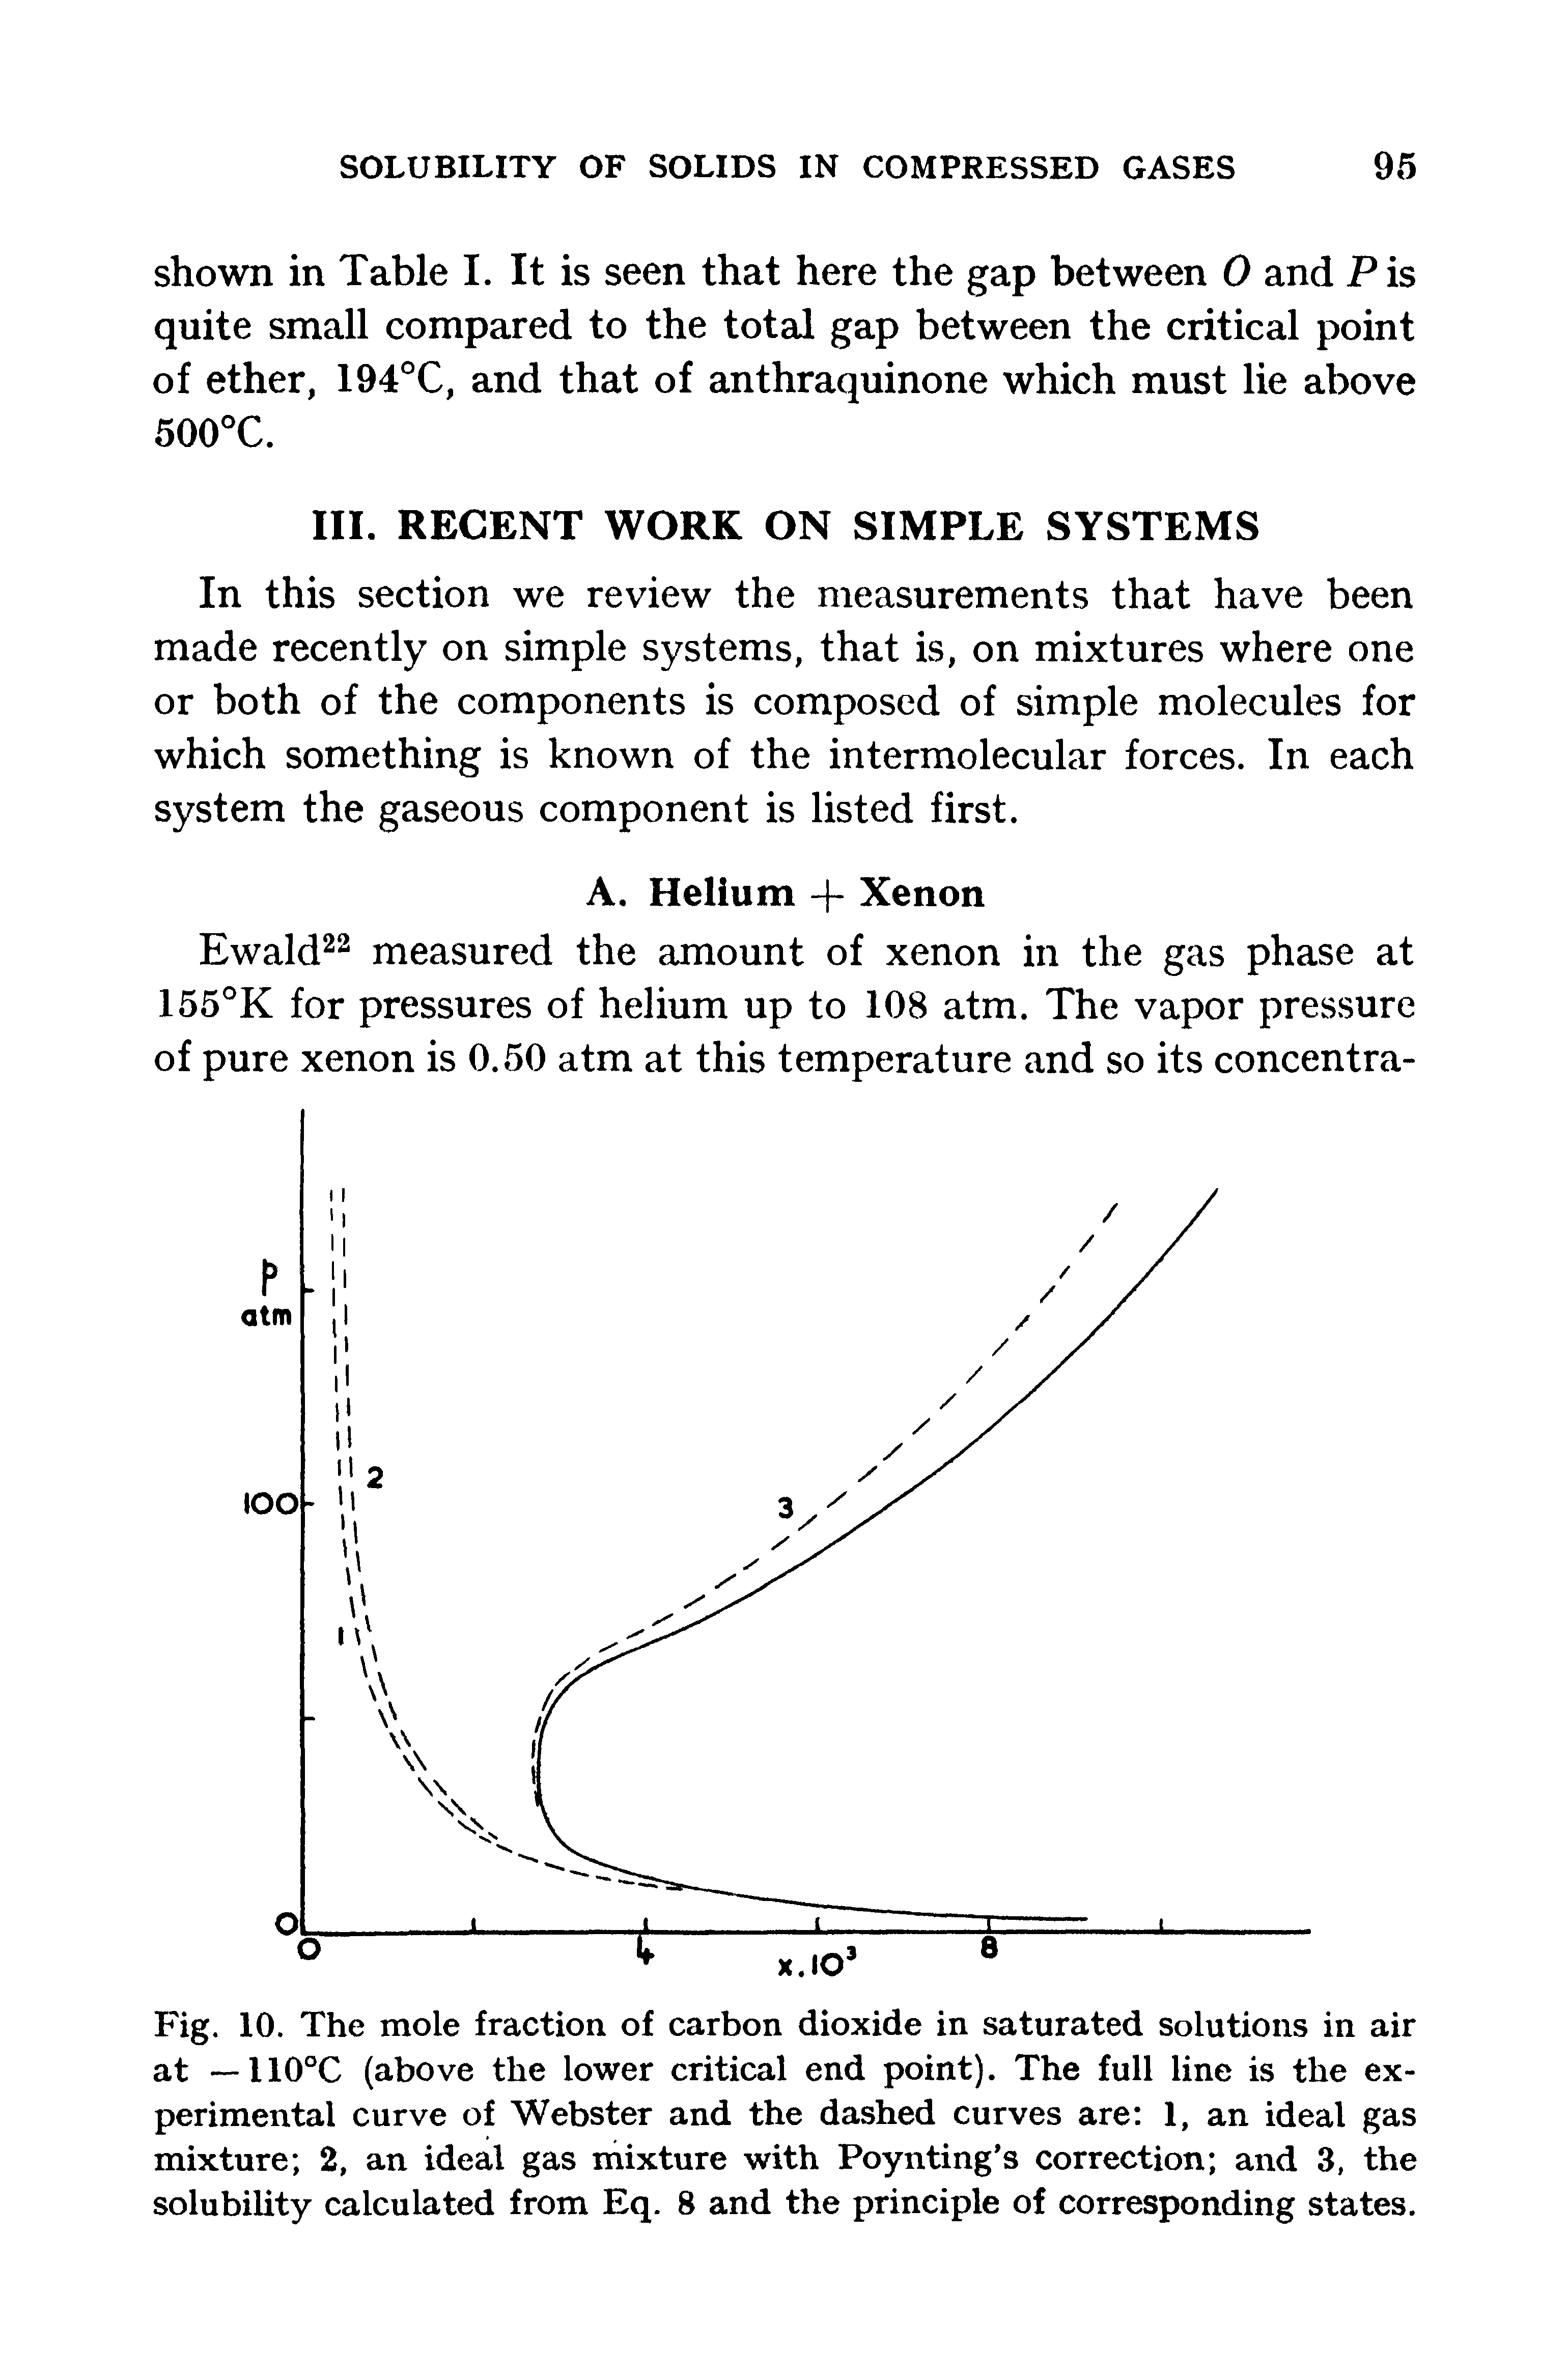 Fig. 10. The mole fraction of carbon dioxide in saturated solutions in air at — 110°C (above the lower critical end point). The full line is the experimental curve of Webster and the dashed curves are 1, an ideal gas mixture 2, an ideal gas mixture with Poynting s correction and 3, the solubility calculated from Eq. 8 and the principle of corresponding states.